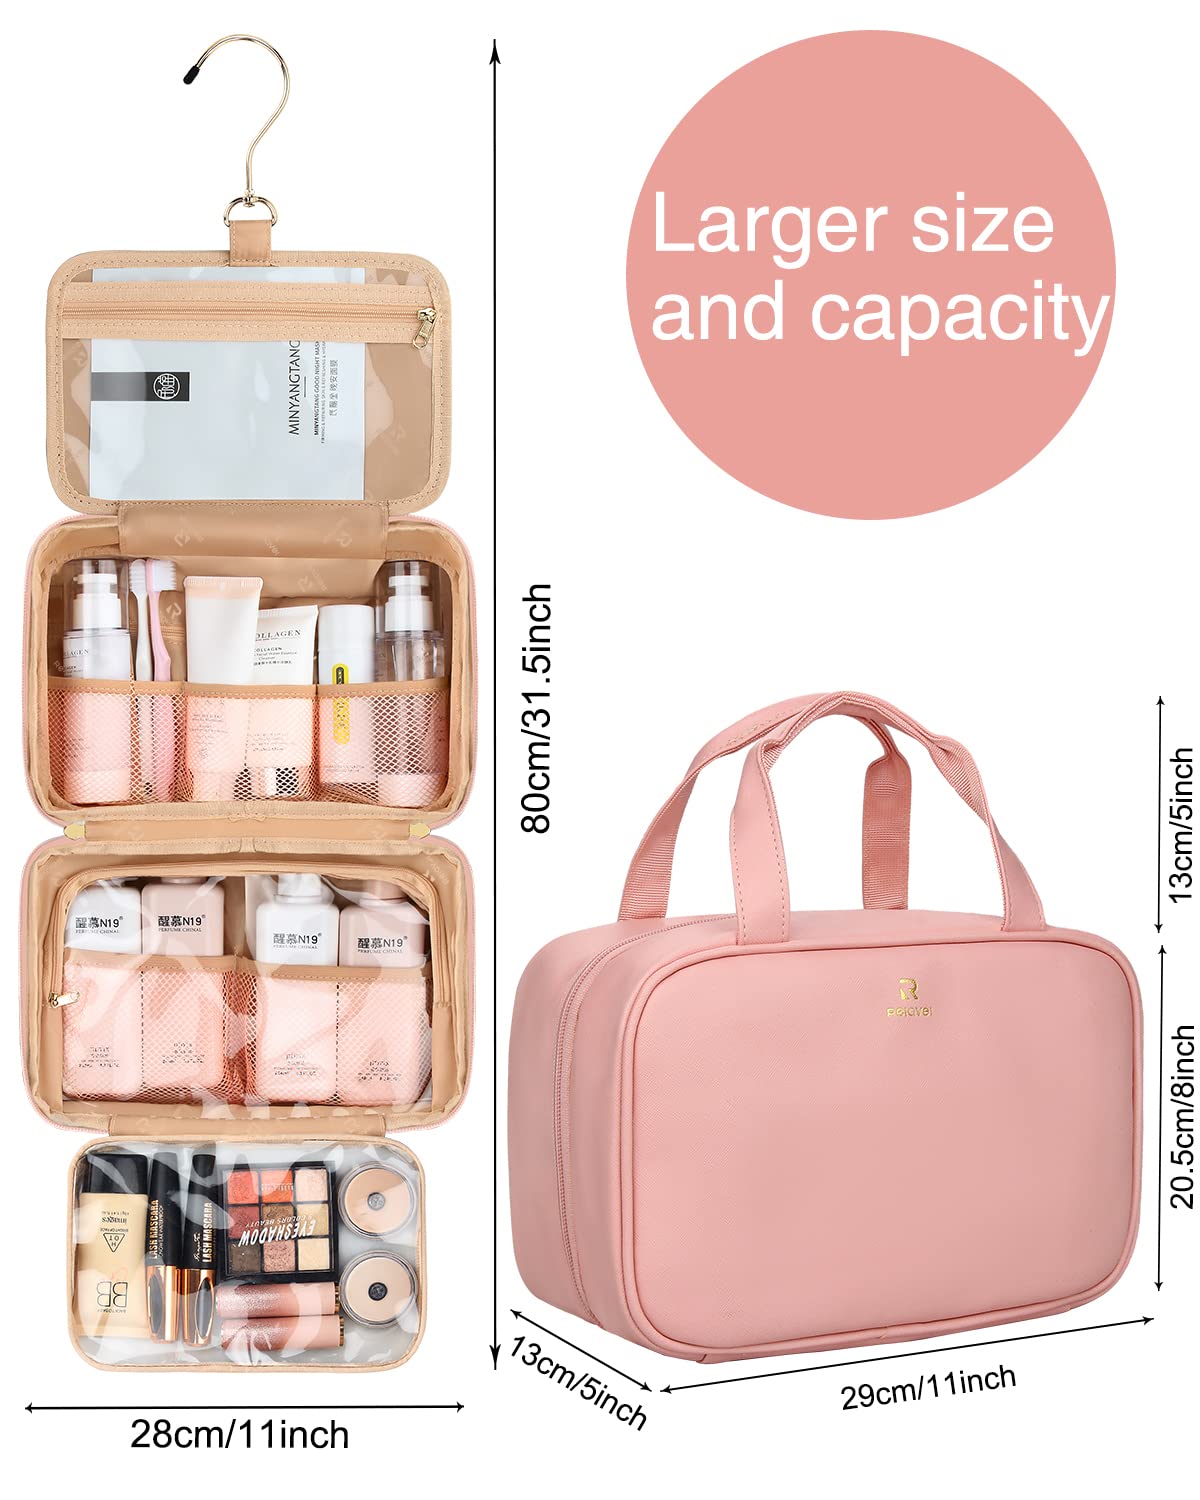 Hanging Toiletry Bag, Travel Toiletry Bag for Women Bathroom Makeup Bag, Large Pink Cosmetic Travel Bag Leather Waterproof for Accessories,Toiletries, Full Sized Container, Hygiene